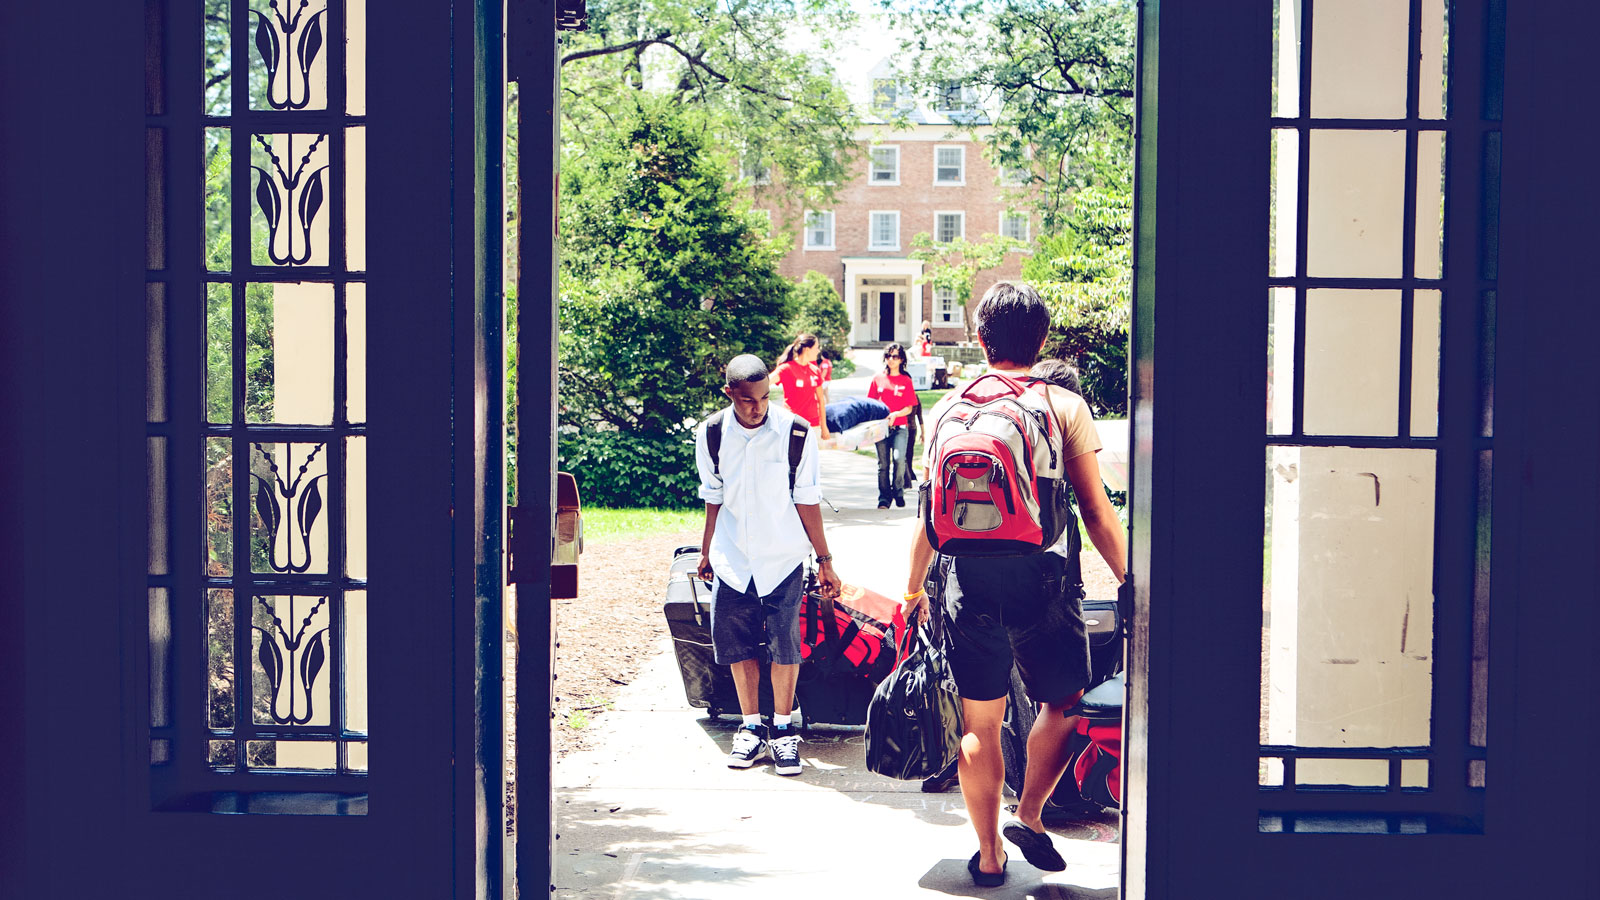 A scene from moving in on North Campus in 2008